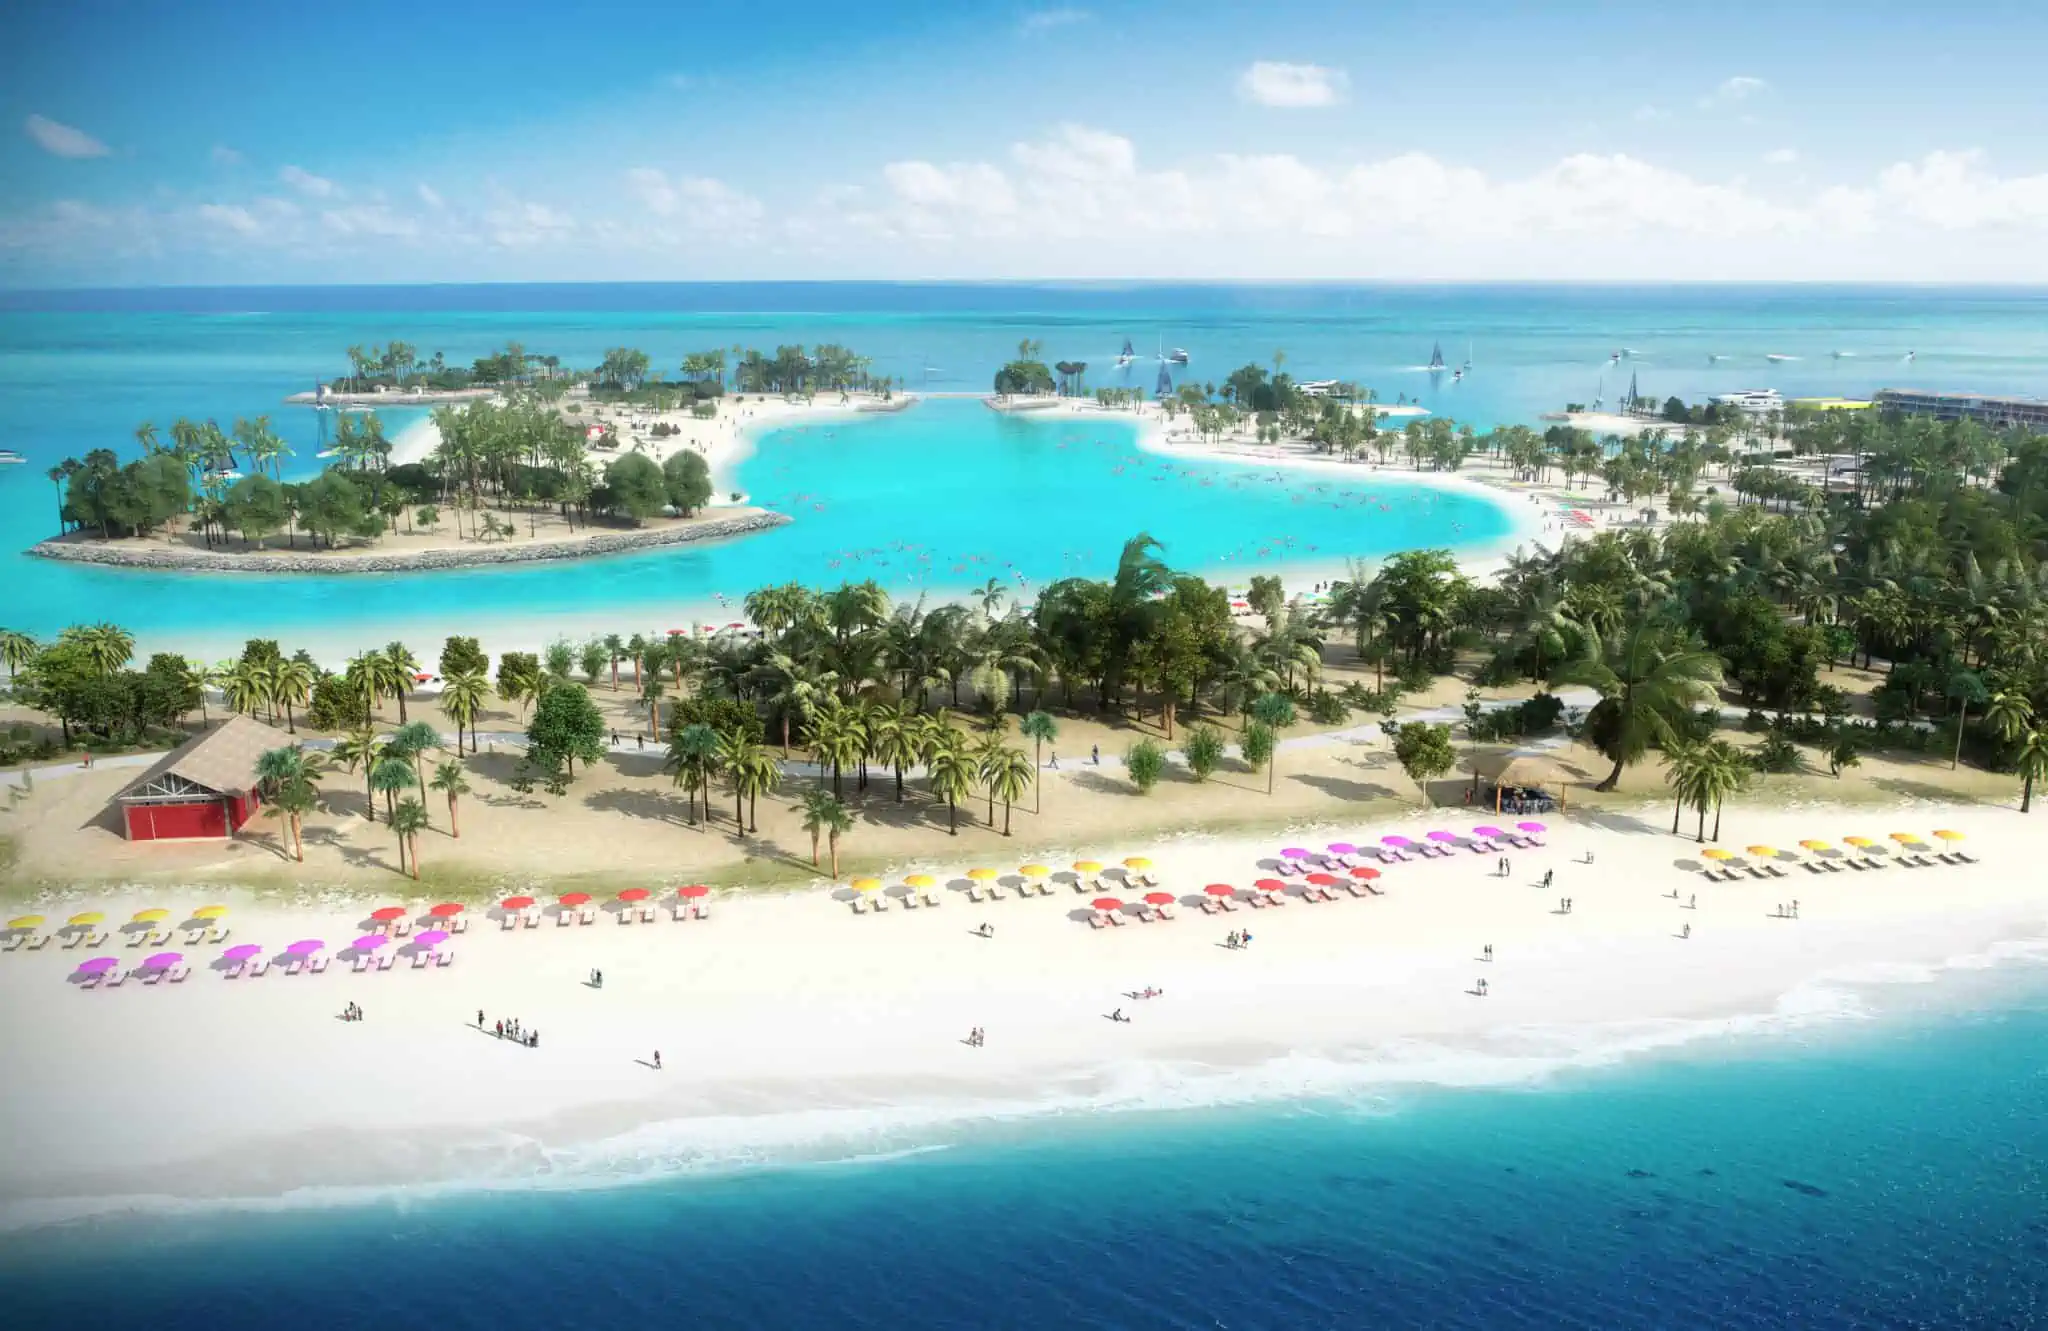 Ocean Cay MSC Marine Reserve features 7 beaches for guests